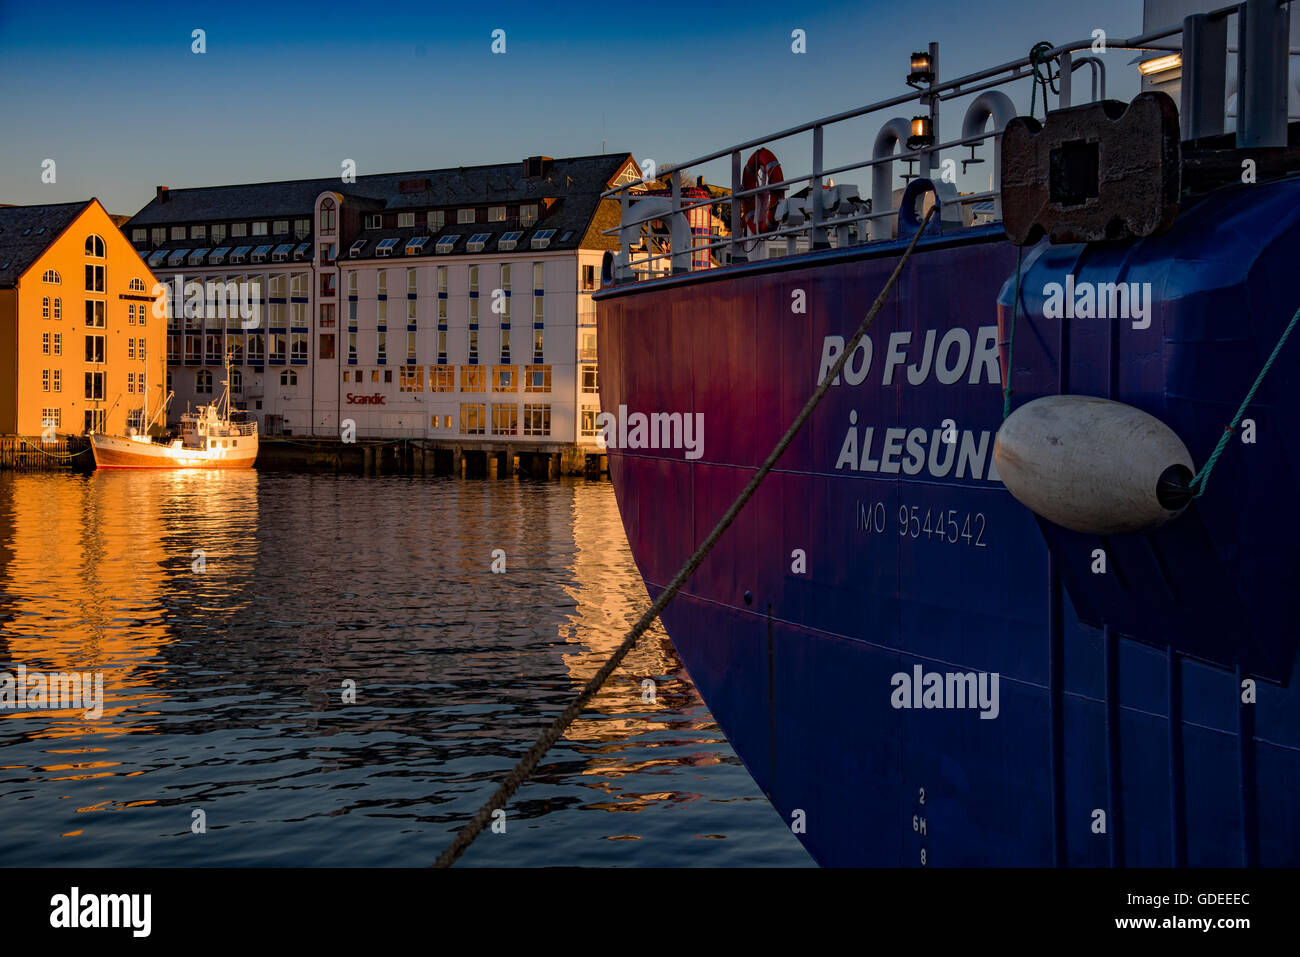 Ships docked in evening light. Brosundet Canal and hotels in background. Alesund, Norway, More og Romsdal, Scandinavia, European Stock Photo